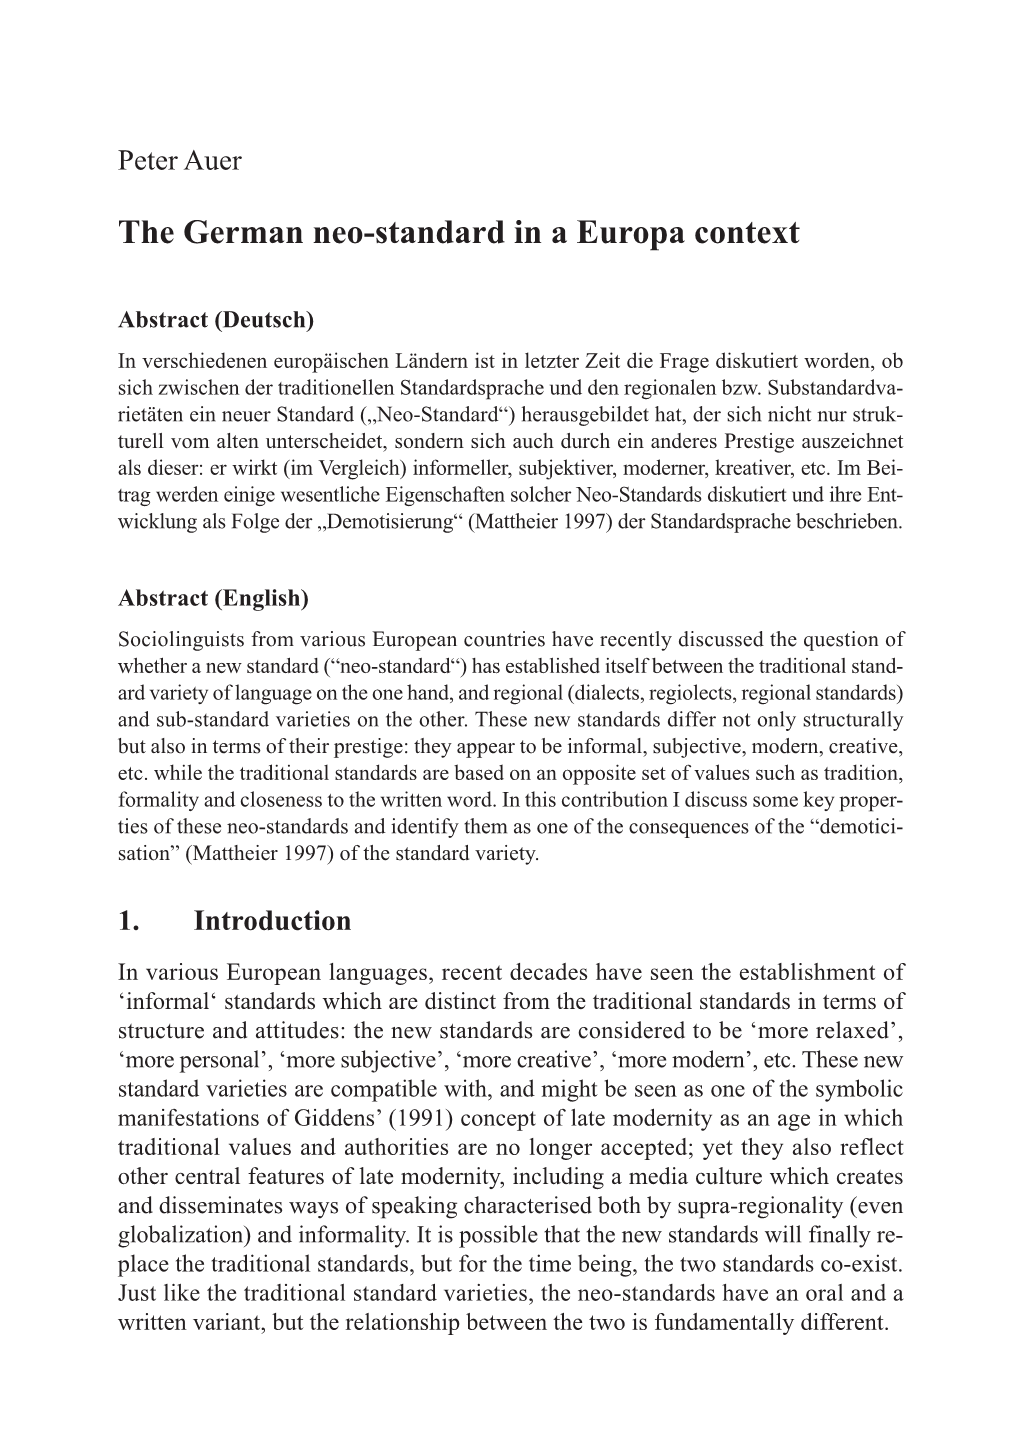 The German Neo-Standard in a Europa Context